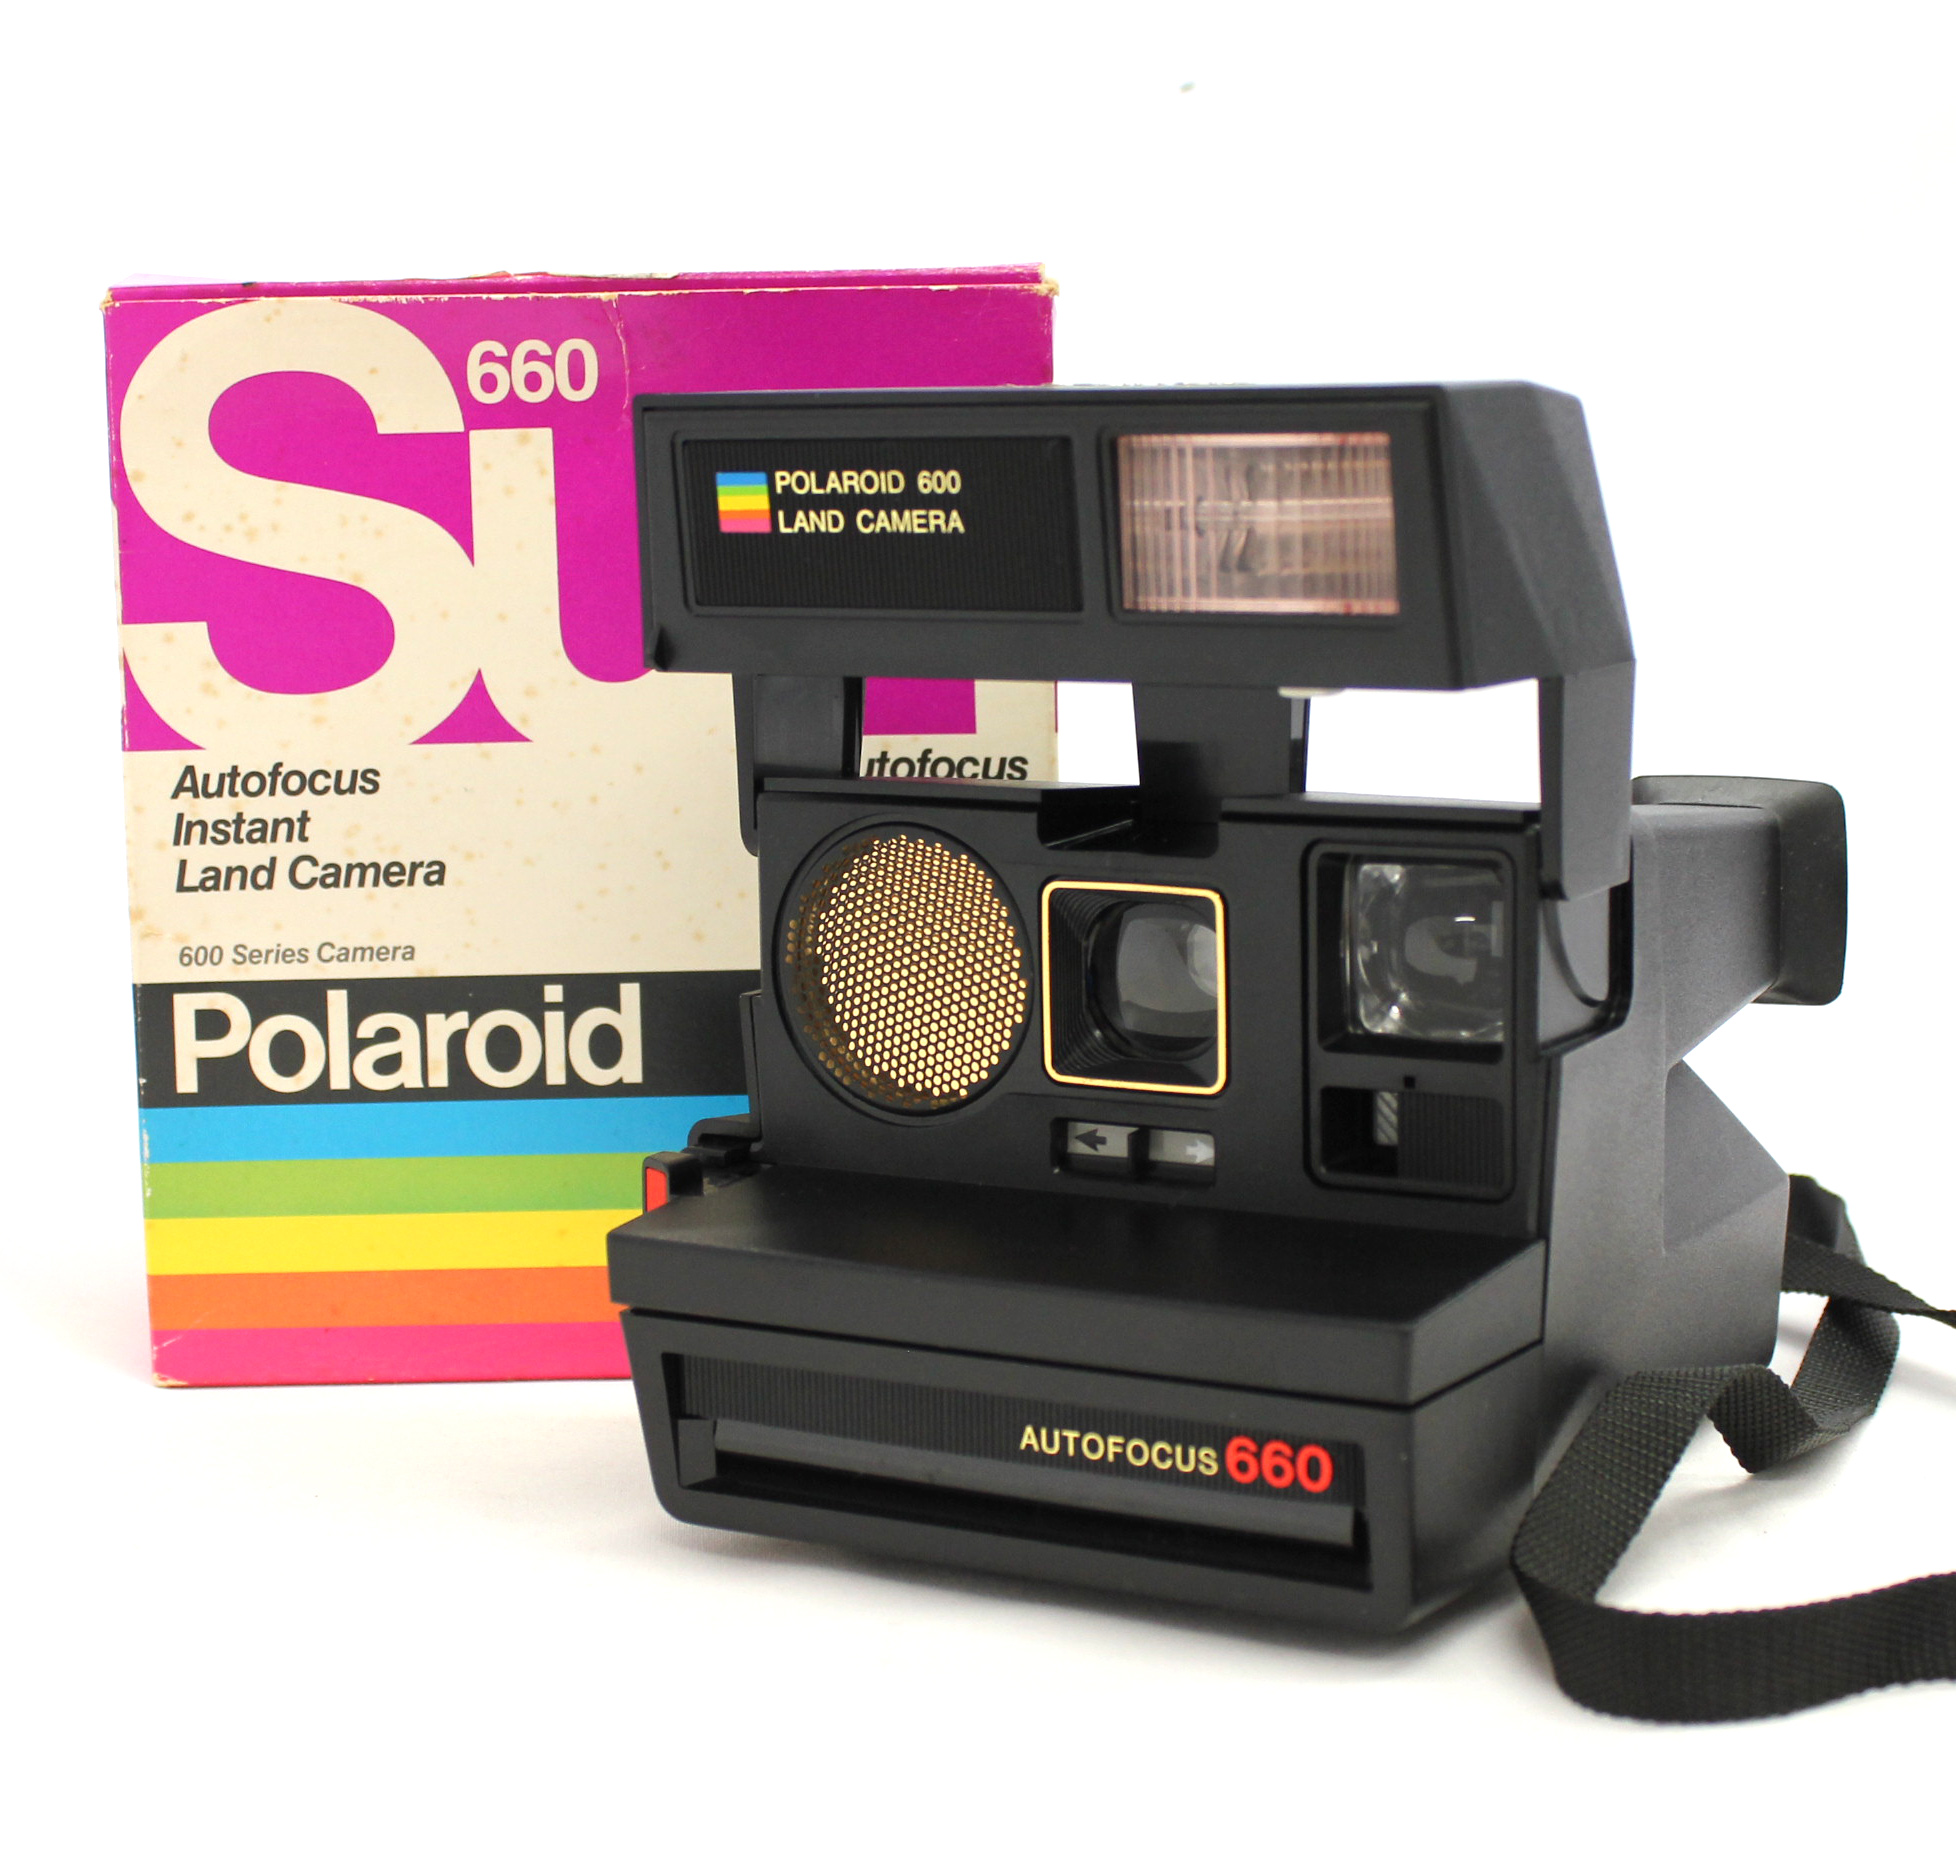 [Near Mint] Polaroid Sun 660 AF Autofocus Instant Land Camera in Box from Japan